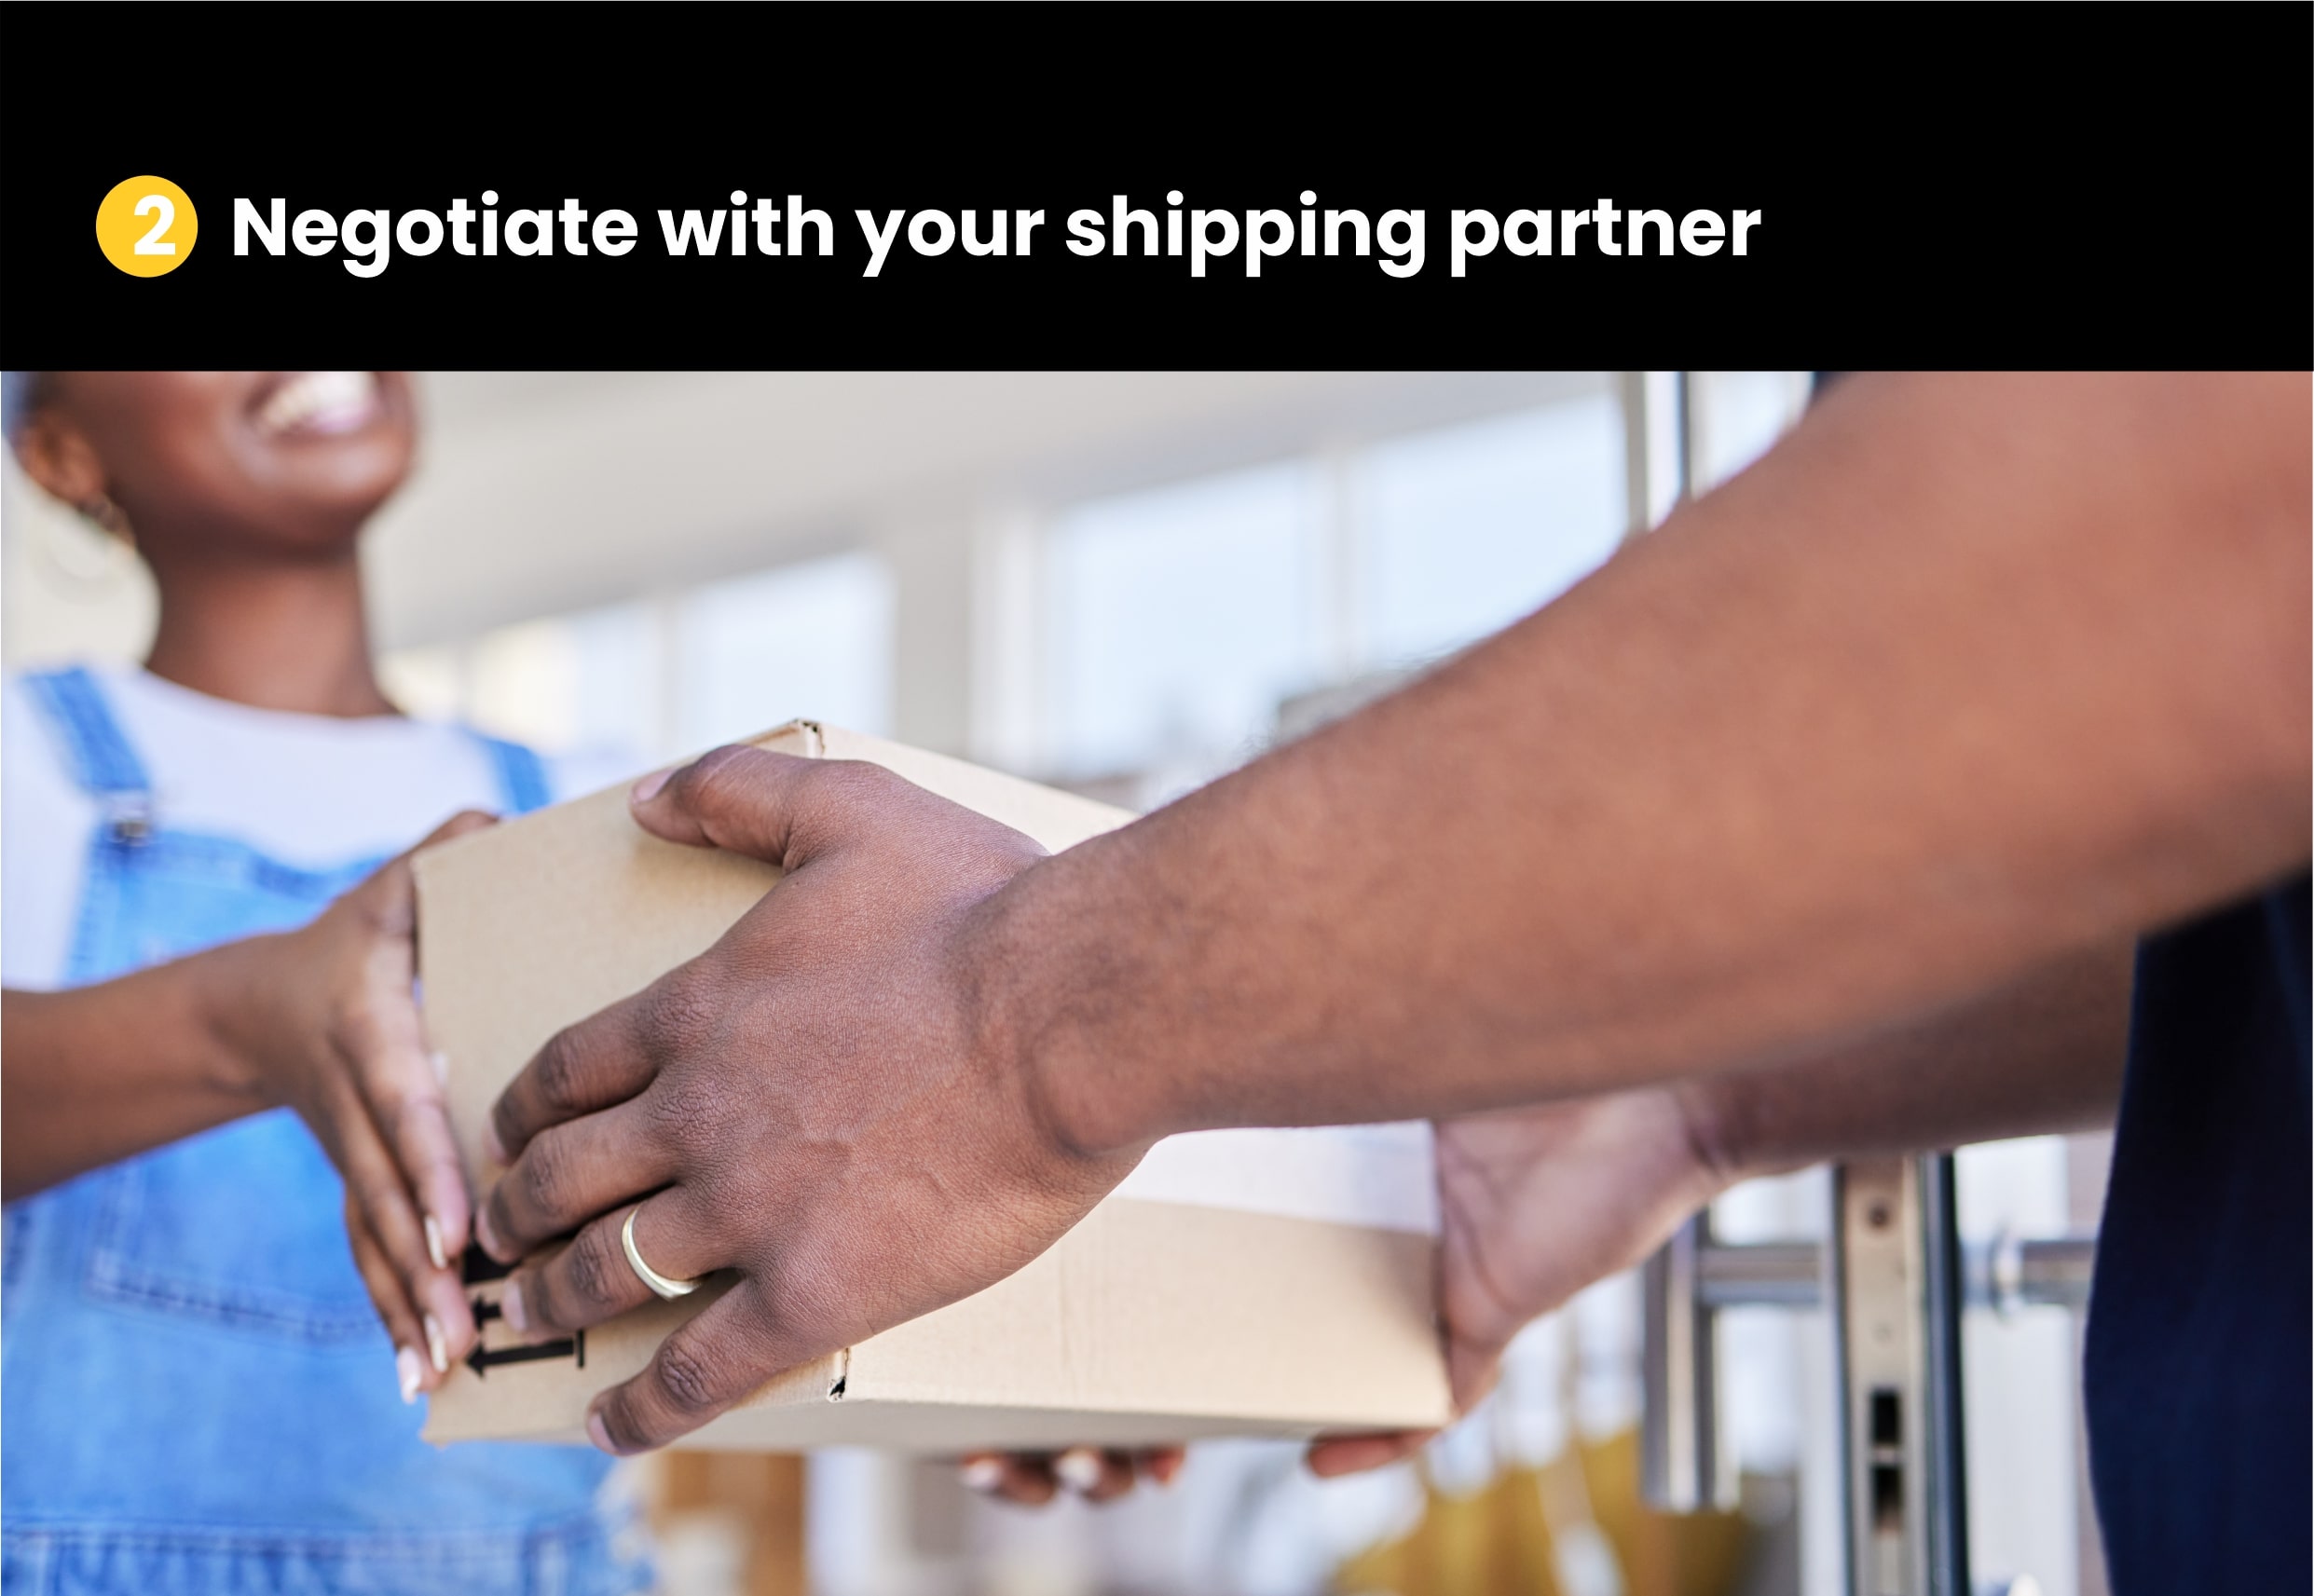 Negotiate with your shipping partner